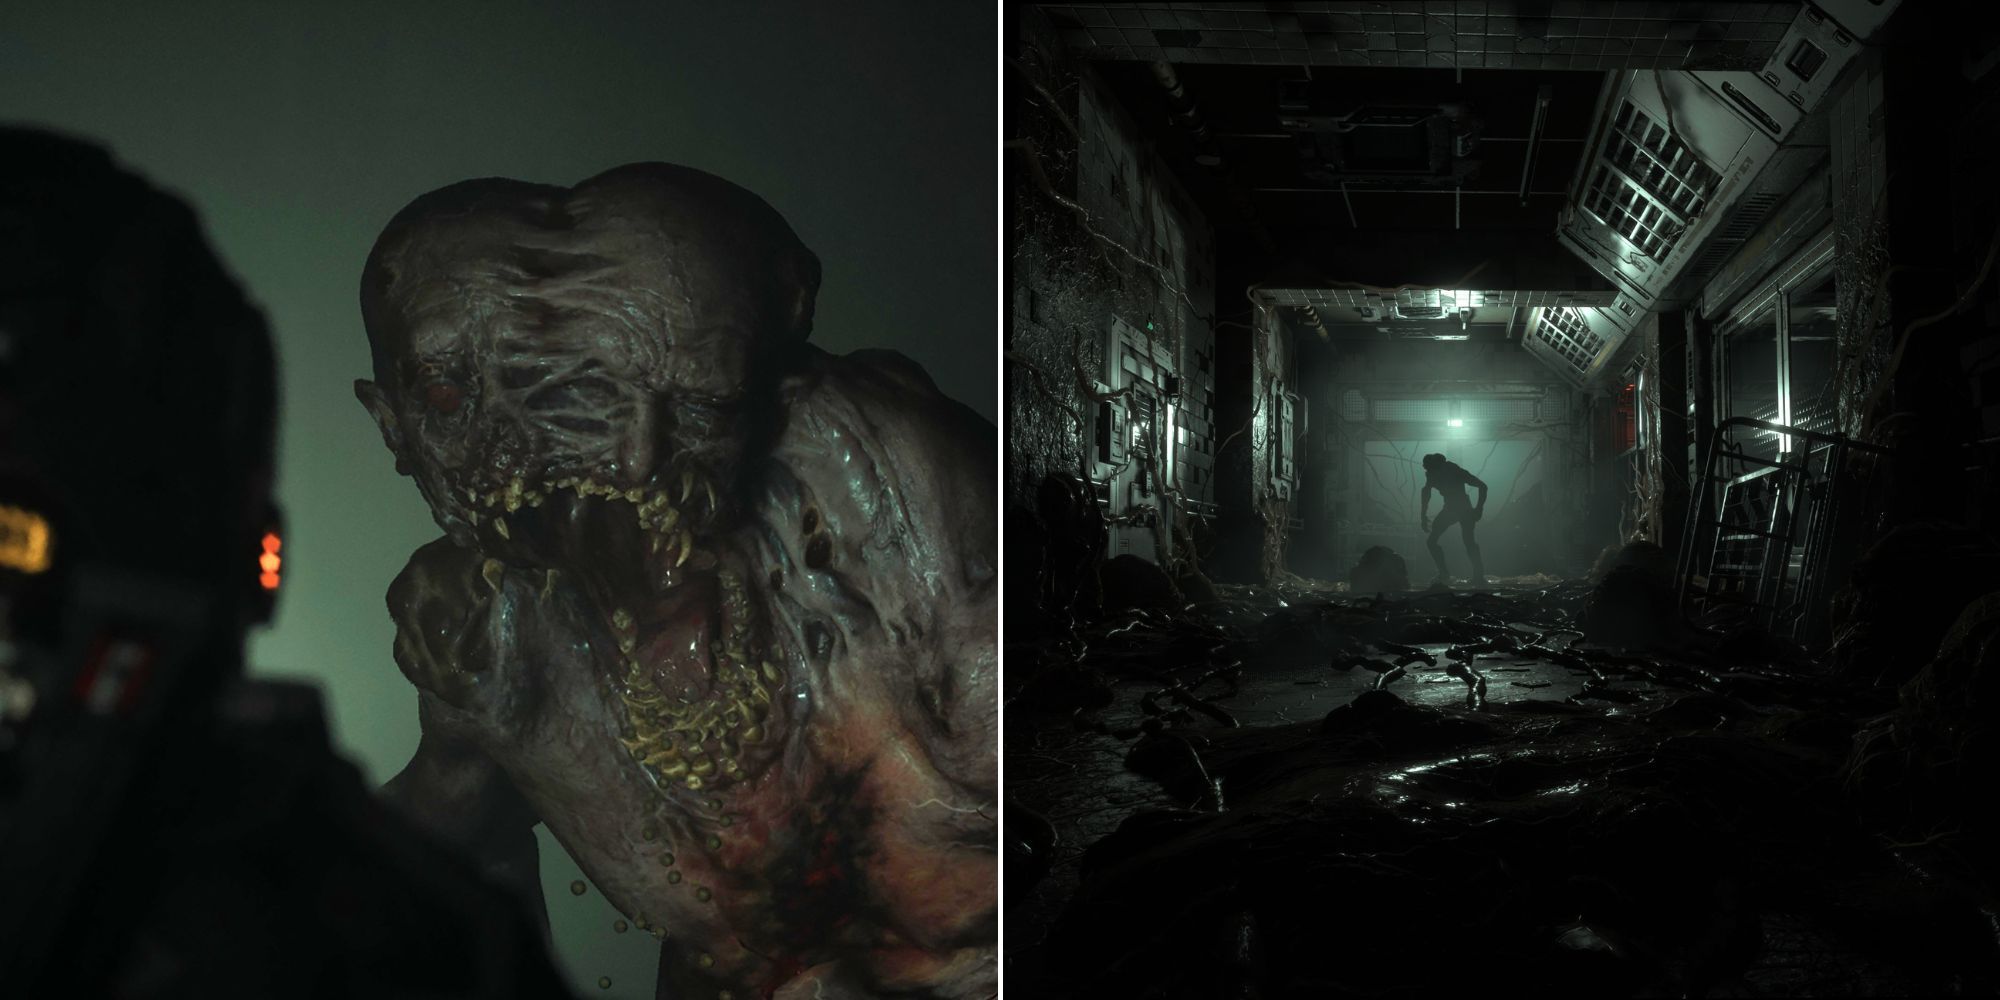 A Monster Up Close To The Player and Another Monster At The End Of A Dark Infested Corridor In The Callisto Protocol